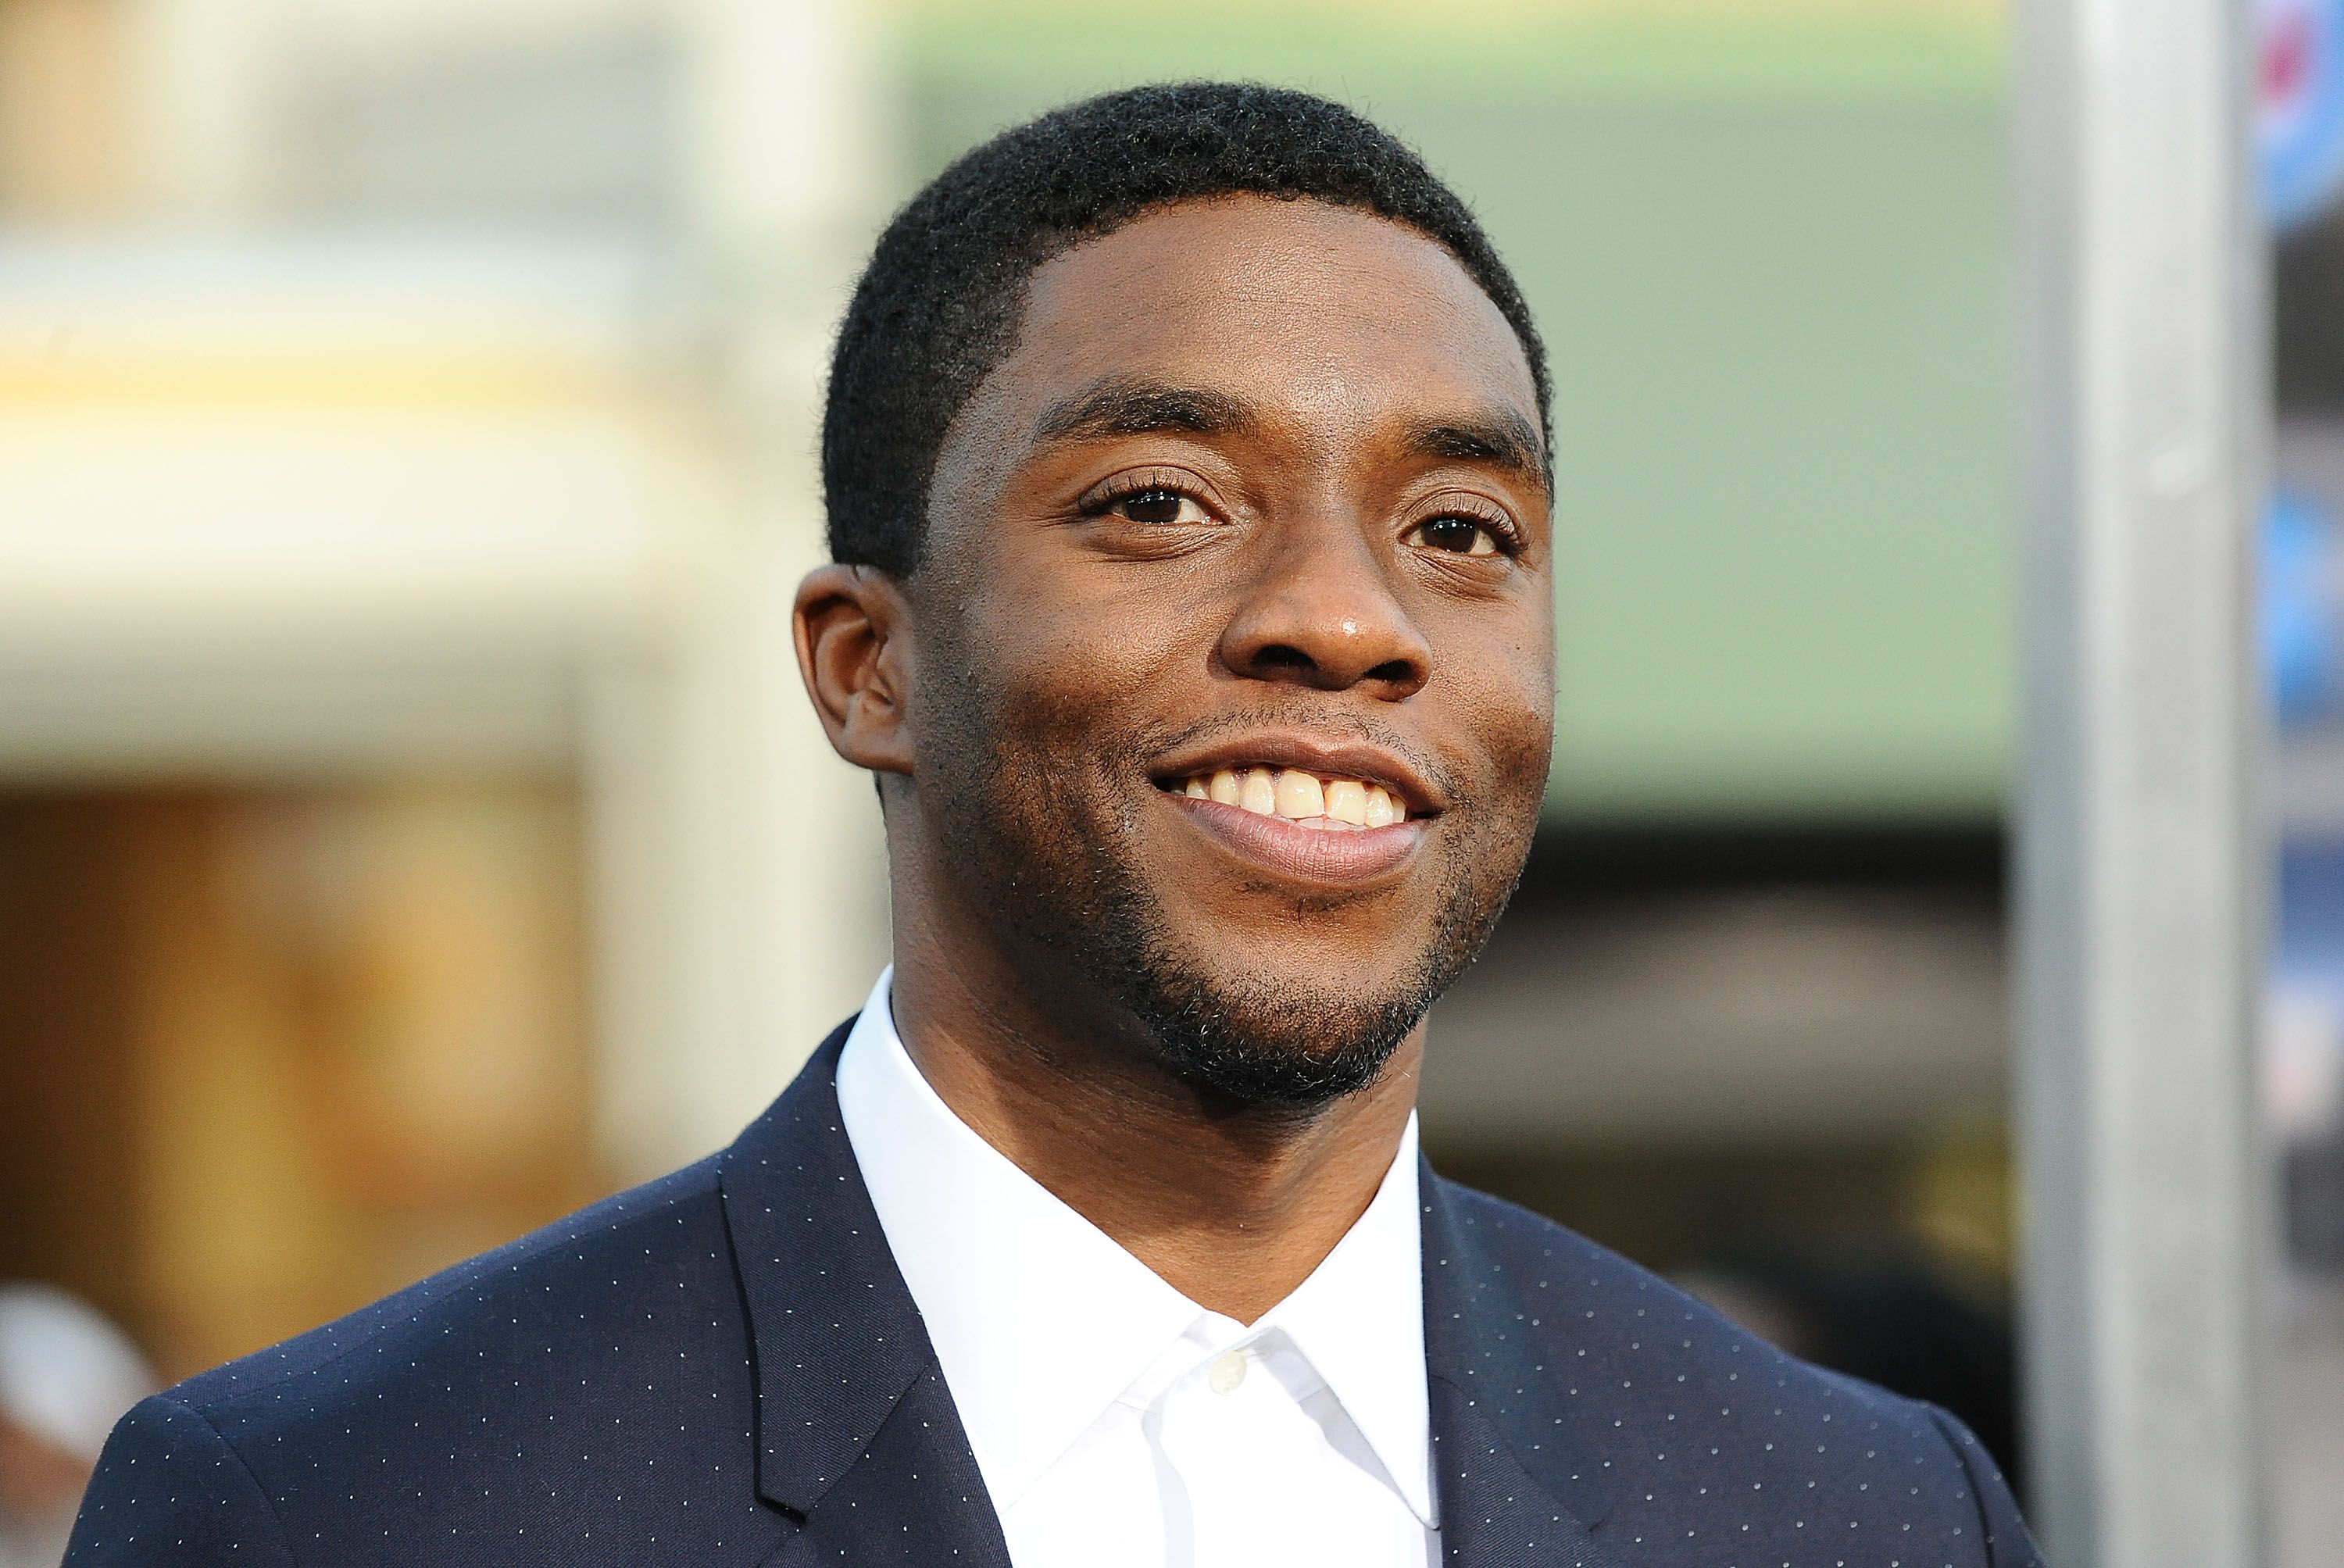 Late Actor Chadwick Boseman at the premiere of "Draft Day" at Regency Bruin Theatre on April 7, 2014 in Los Angeles, California. | Photo: Getty Images